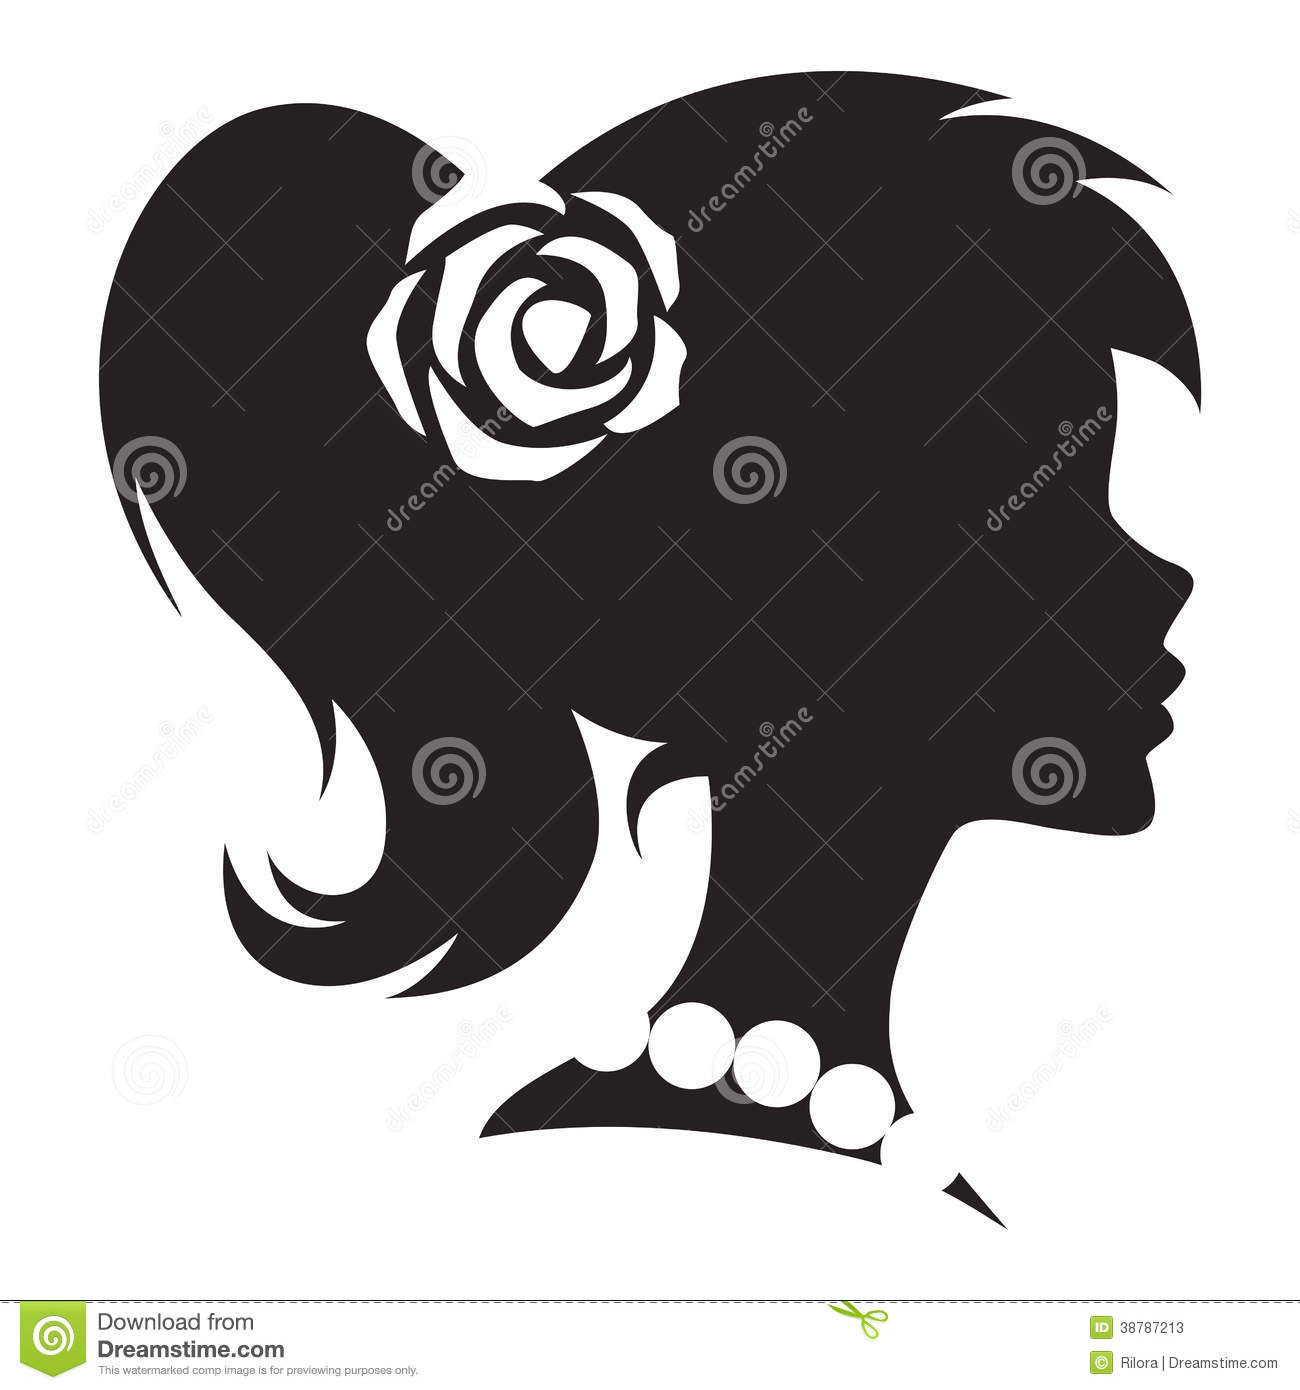 Vintage Cameo Women Silhouette Stock Vector   Image  38787213